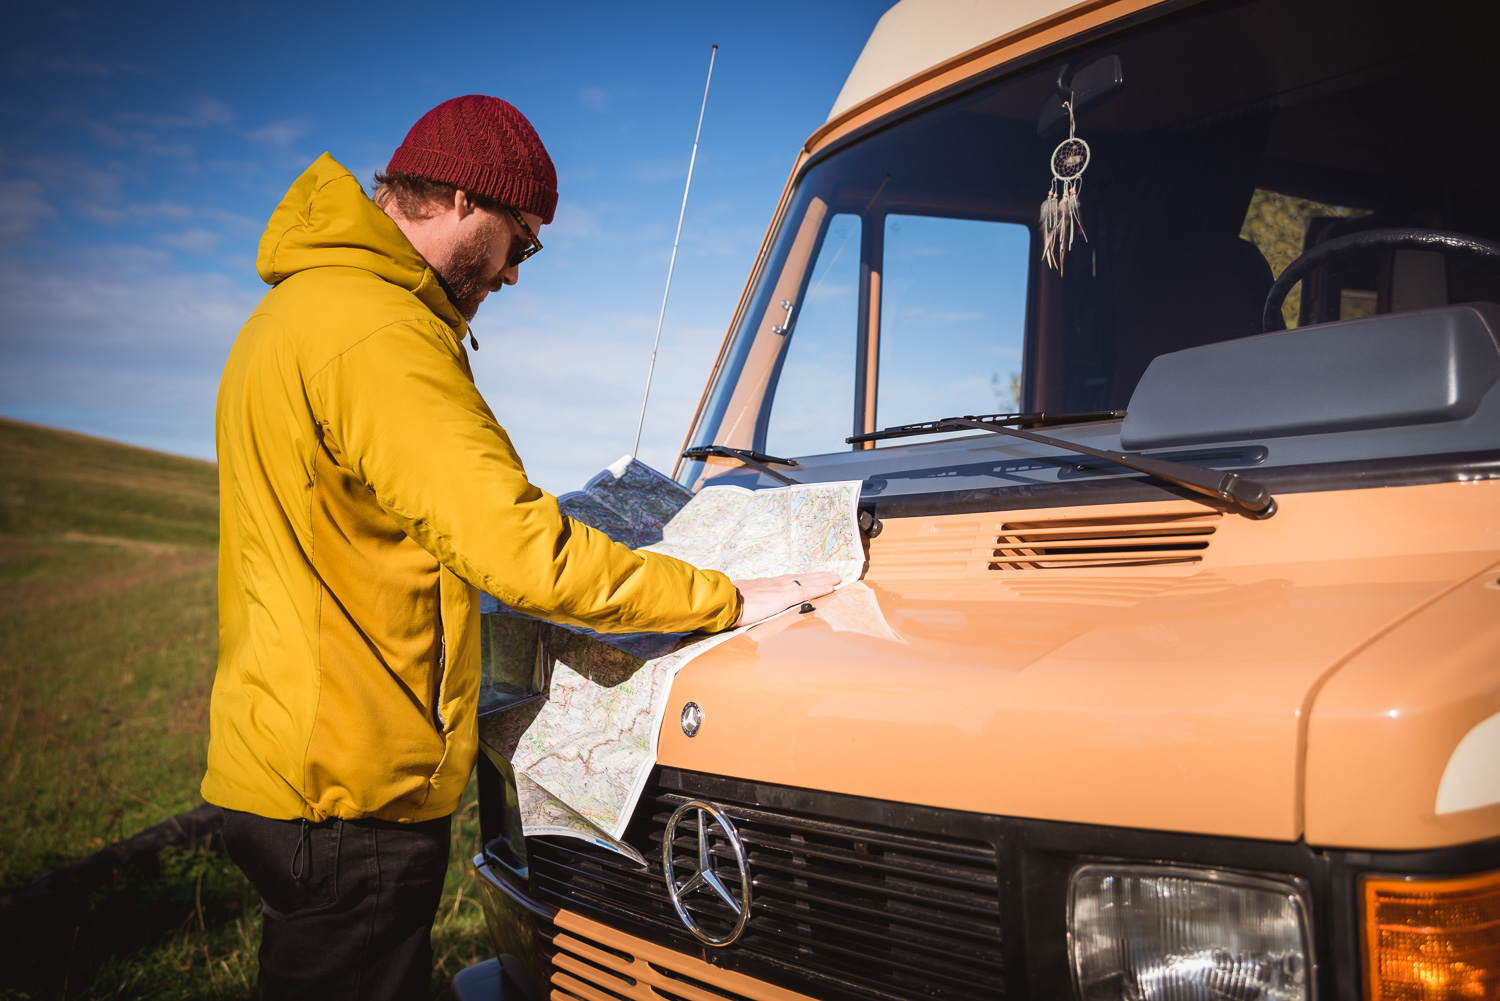 Mercedes-Benz Celebrates Marco Polo Camper Turning 35 With ArtVenture ...